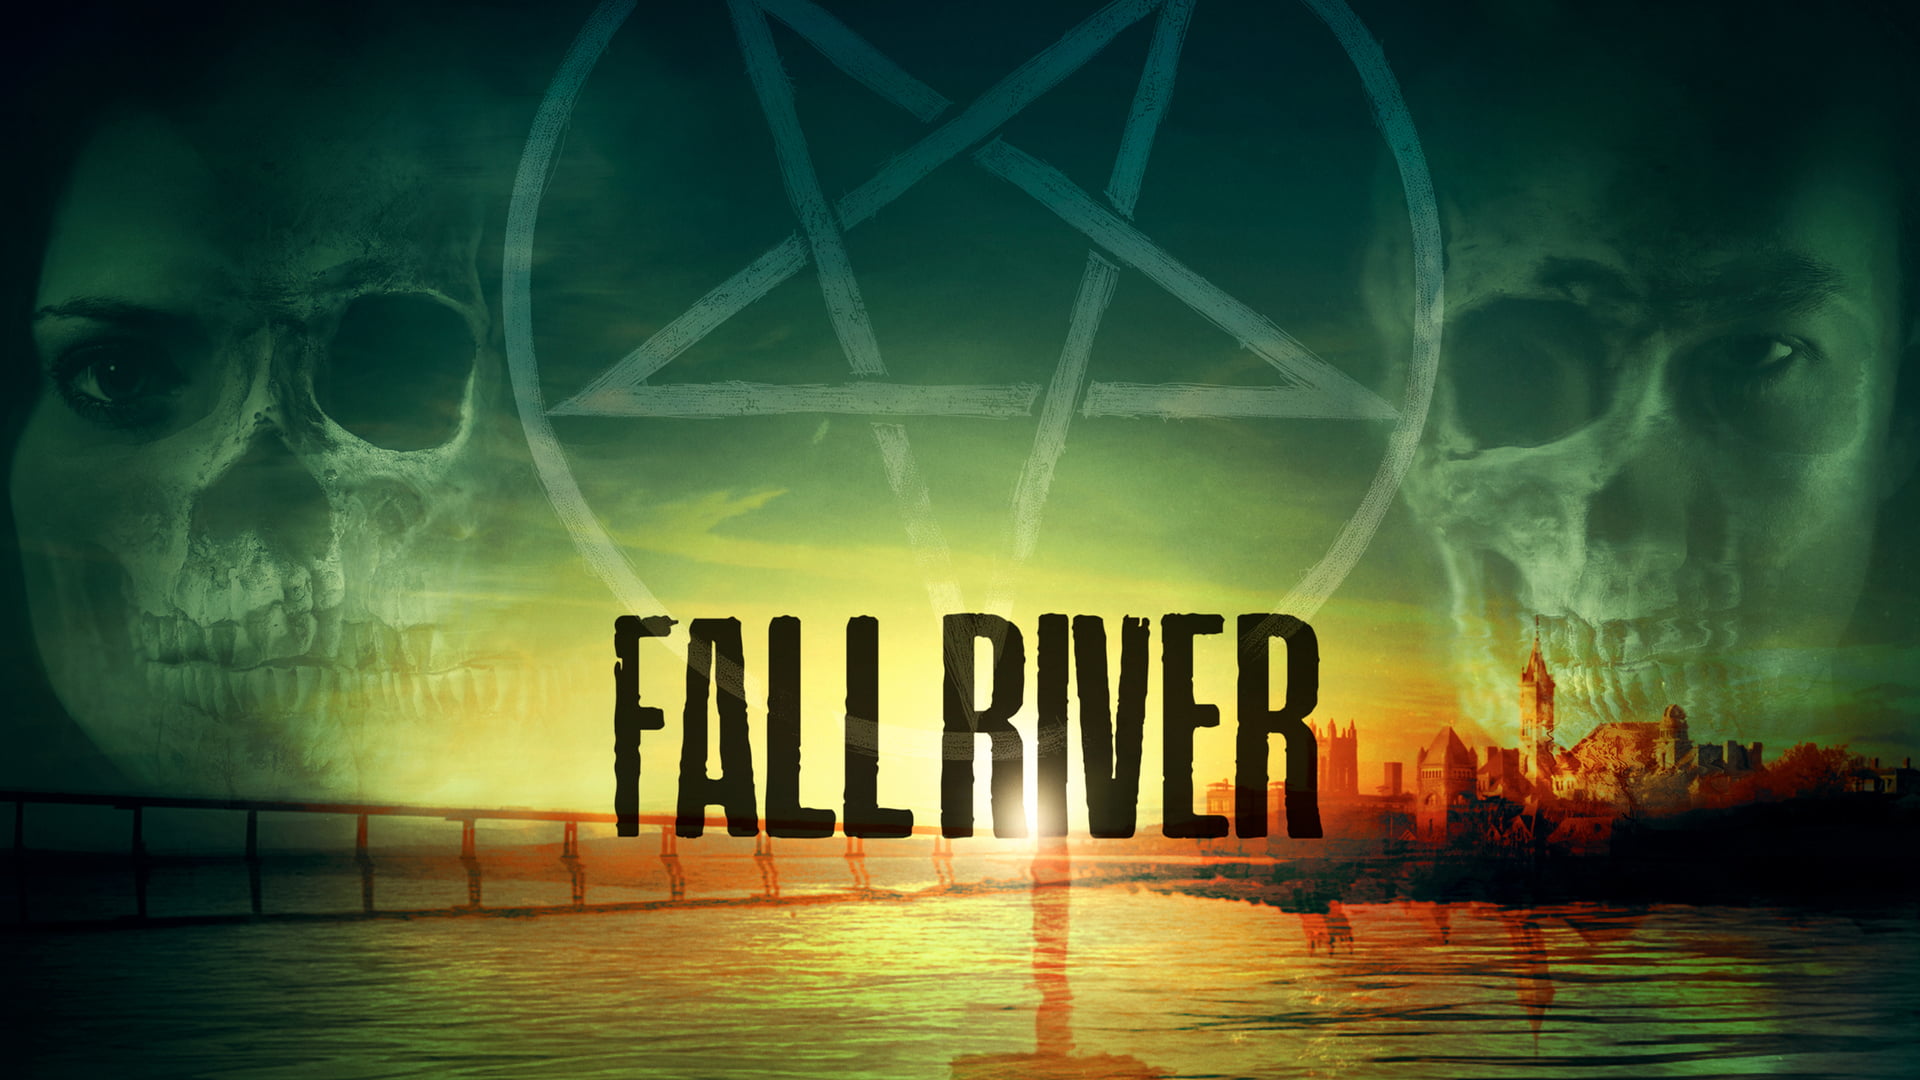 'Fall River' identifies another victim of the Satanic Panic